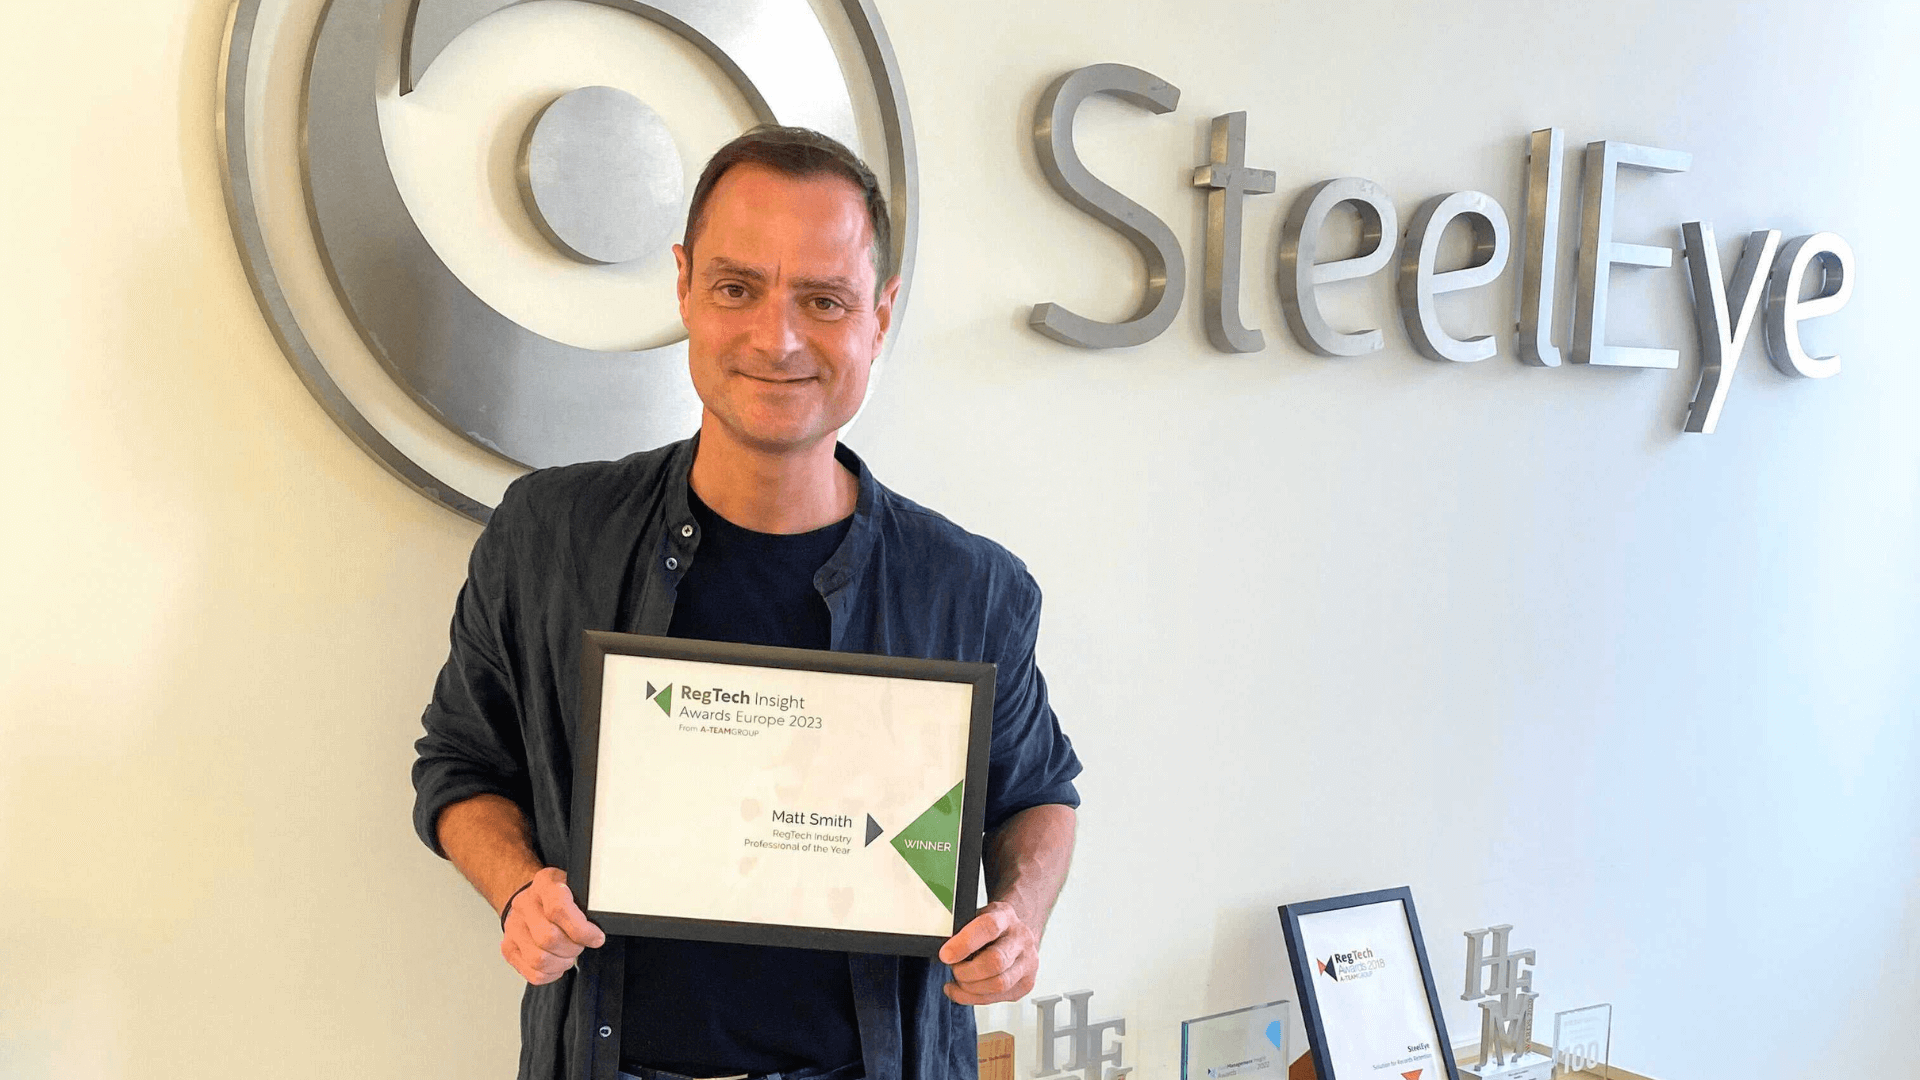 SteelEye - CEO, Matt Smith, recognized as RegTech Industry Professional of the Year Award